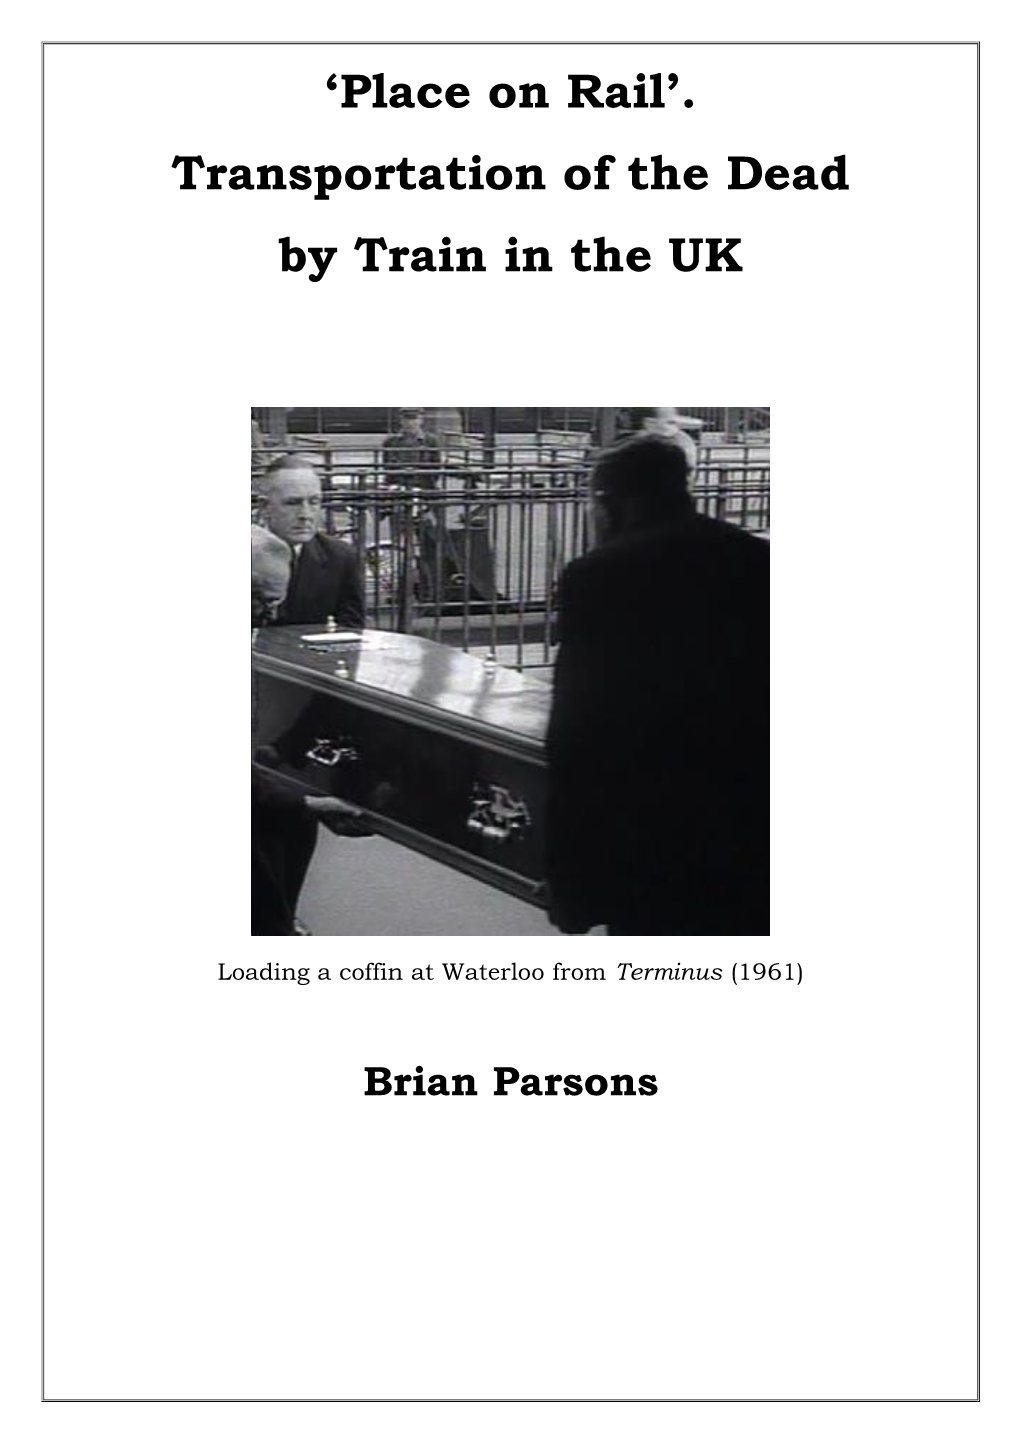 'Place on Rail'. Transportation of the Dead by Train in the UK